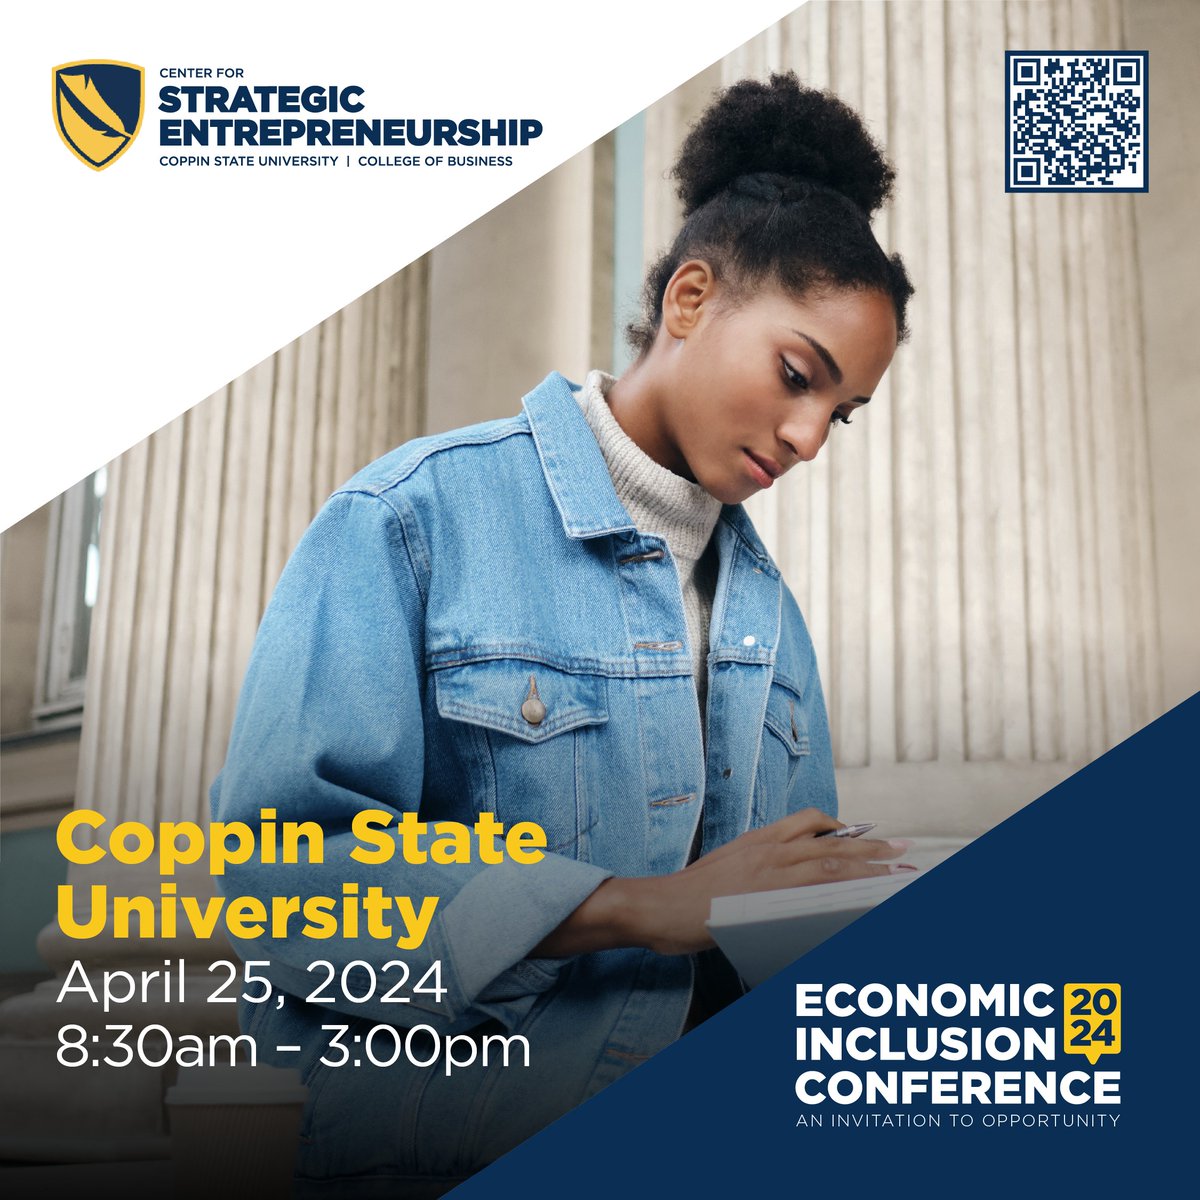 Small businesses create 2 out of every 3 new jobs in the US each year! You too can be a part of this economic engine. Attend the Economic Inclusion Conference at Coppin State University on April 25th. Register now: coppin.edu/eicac #EICAC2024 #Entrepreneurship